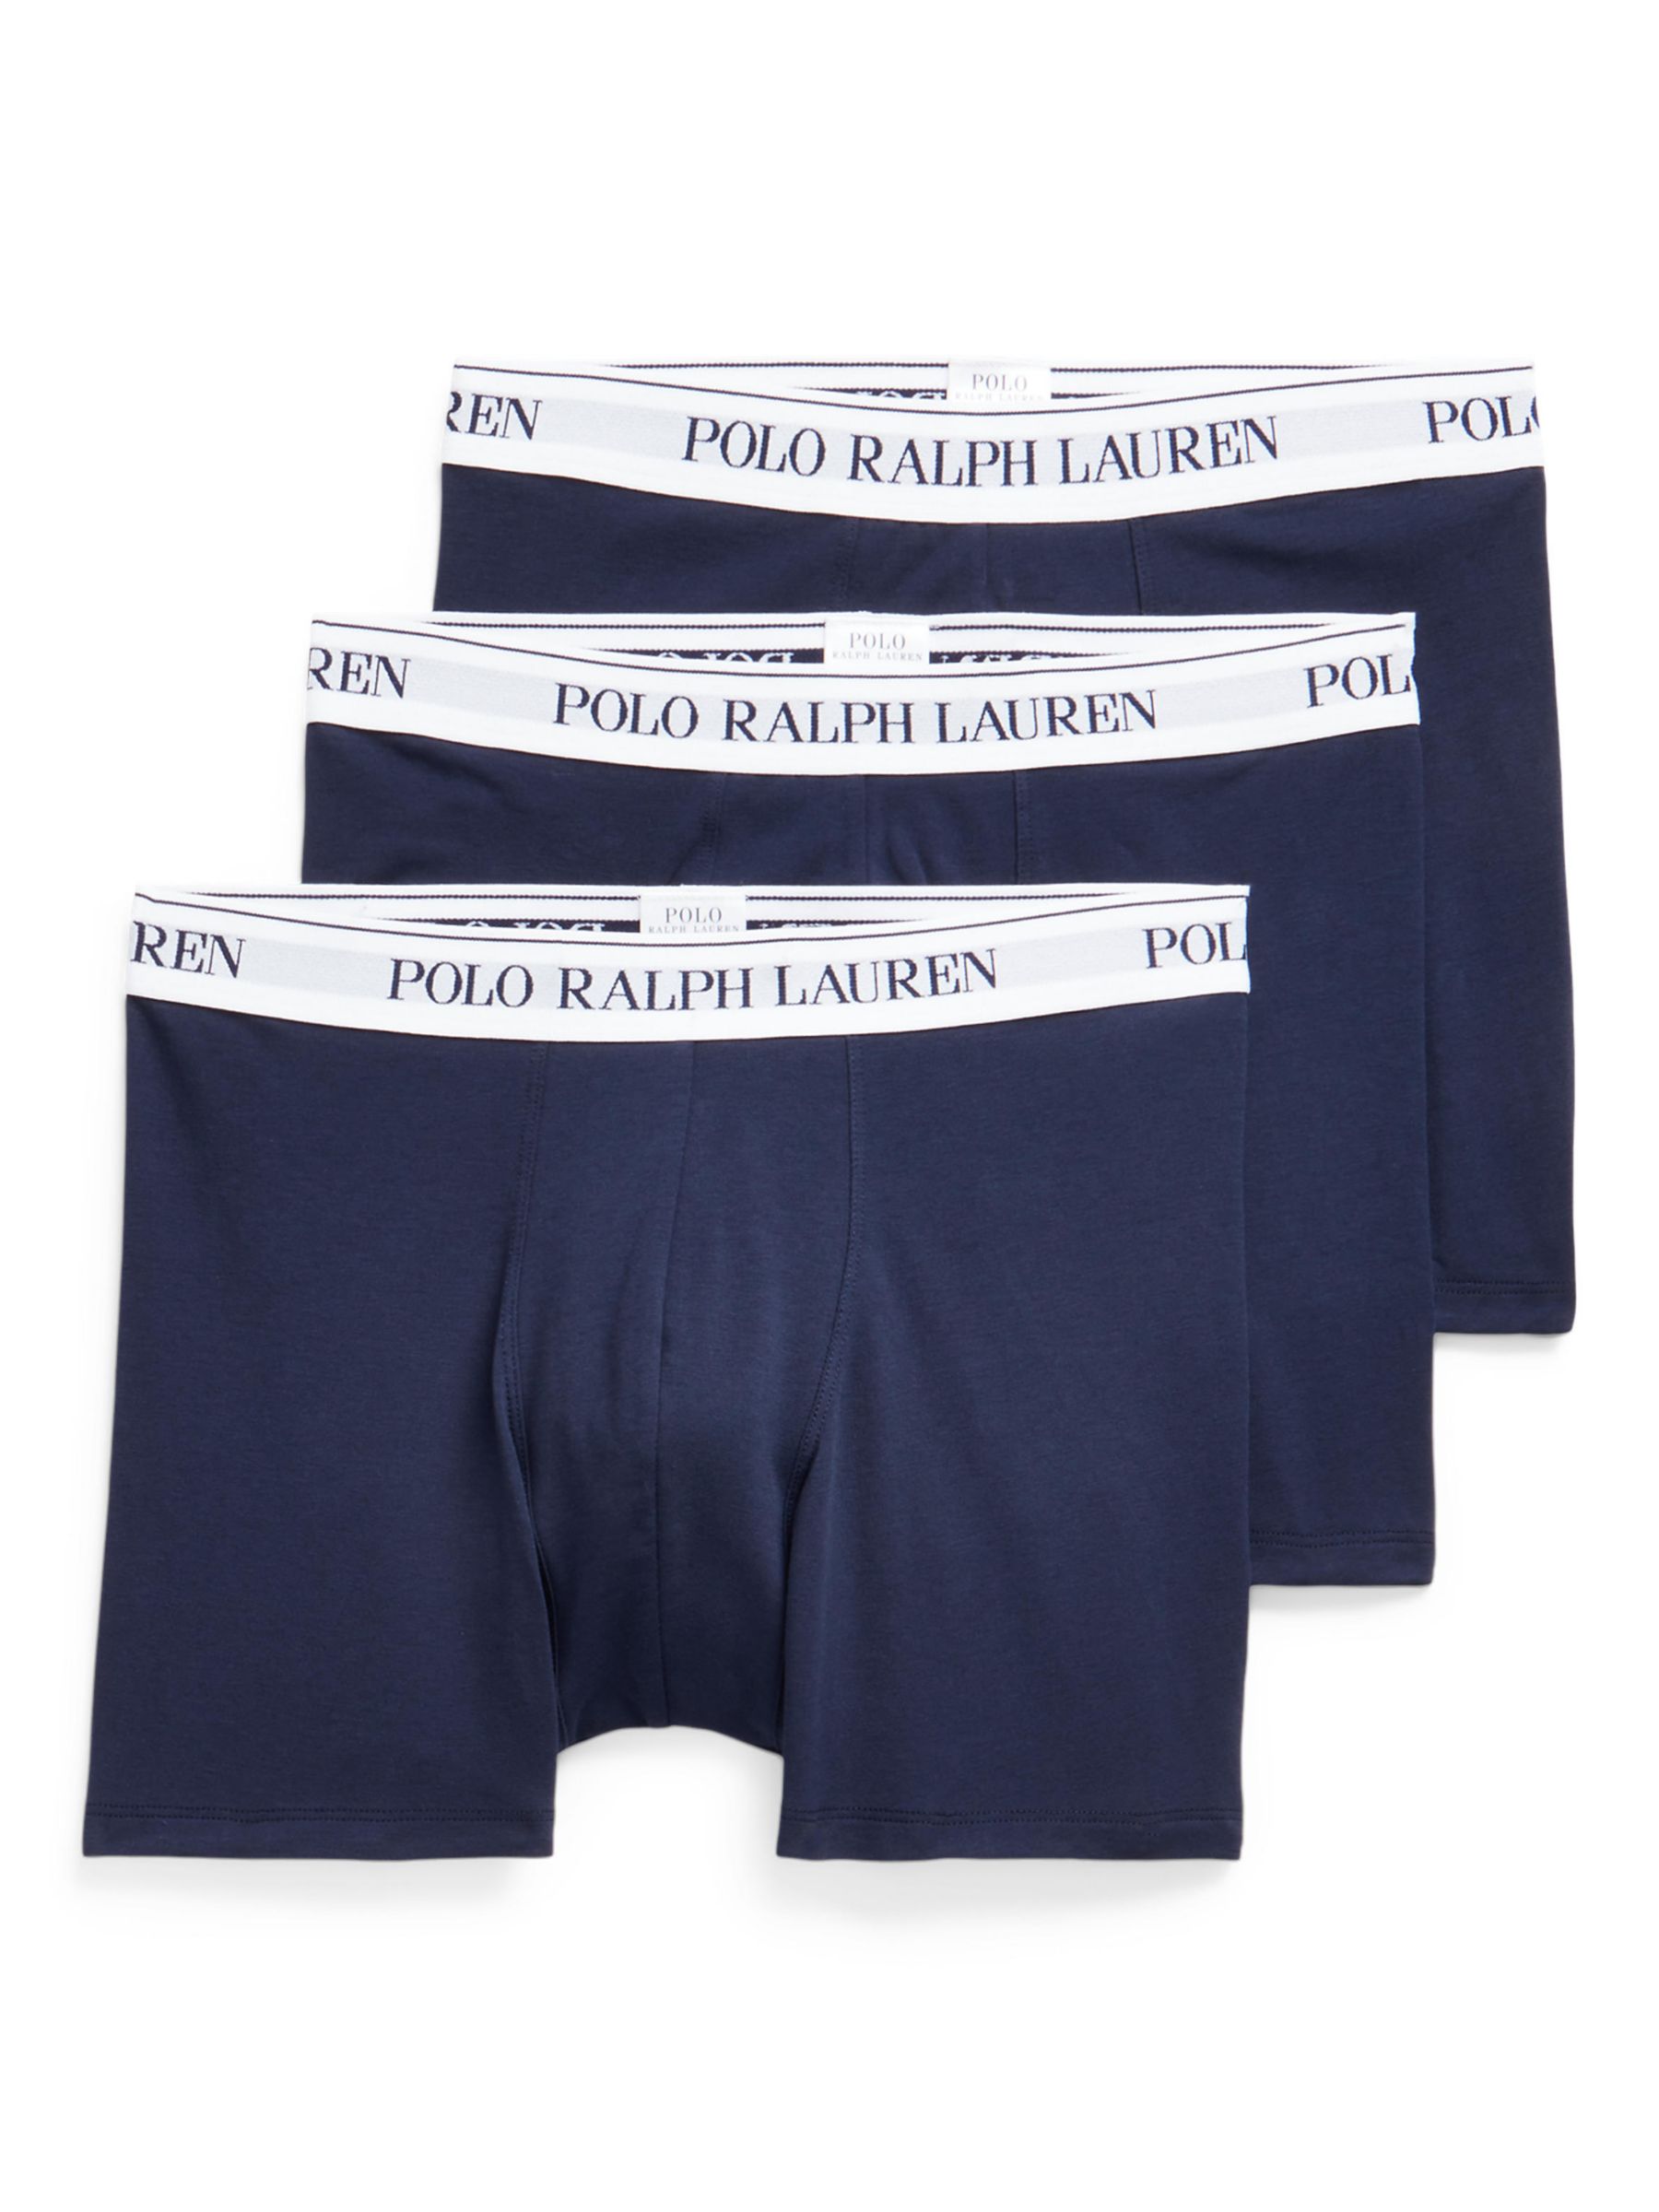 Polo Ralph Lauren Stretch Cotton Boxer Briefs, Pack of 3, Navy/White, S